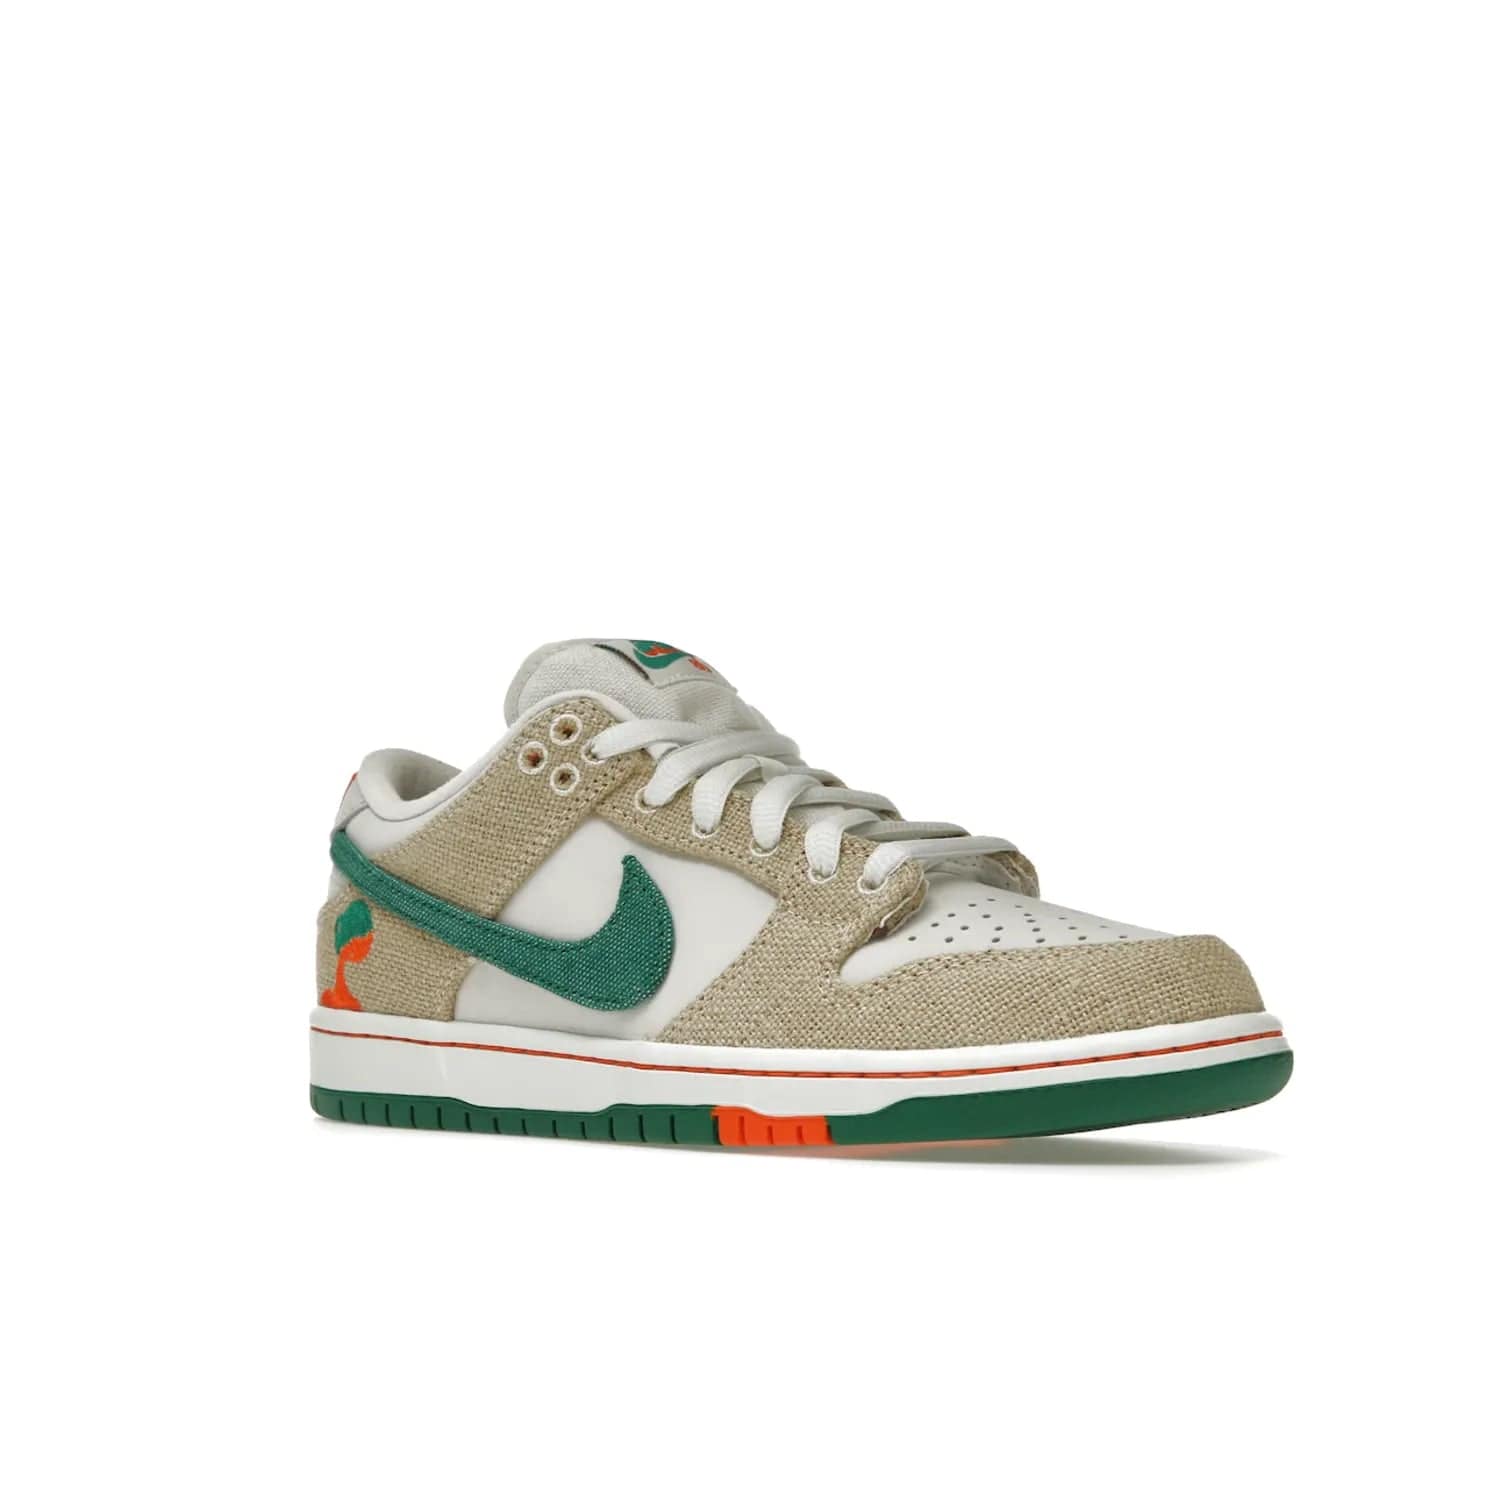 Nike SB Dunk Low Jarritos - Image 5 - Only at www.BallersClubKickz.com - Shop limited edition Nike SB Dunk Low Jarritos! Crafted with white leather and tear-away canvas materials with green accents. Includes orange, green, and white laces to customize your look. Available now.